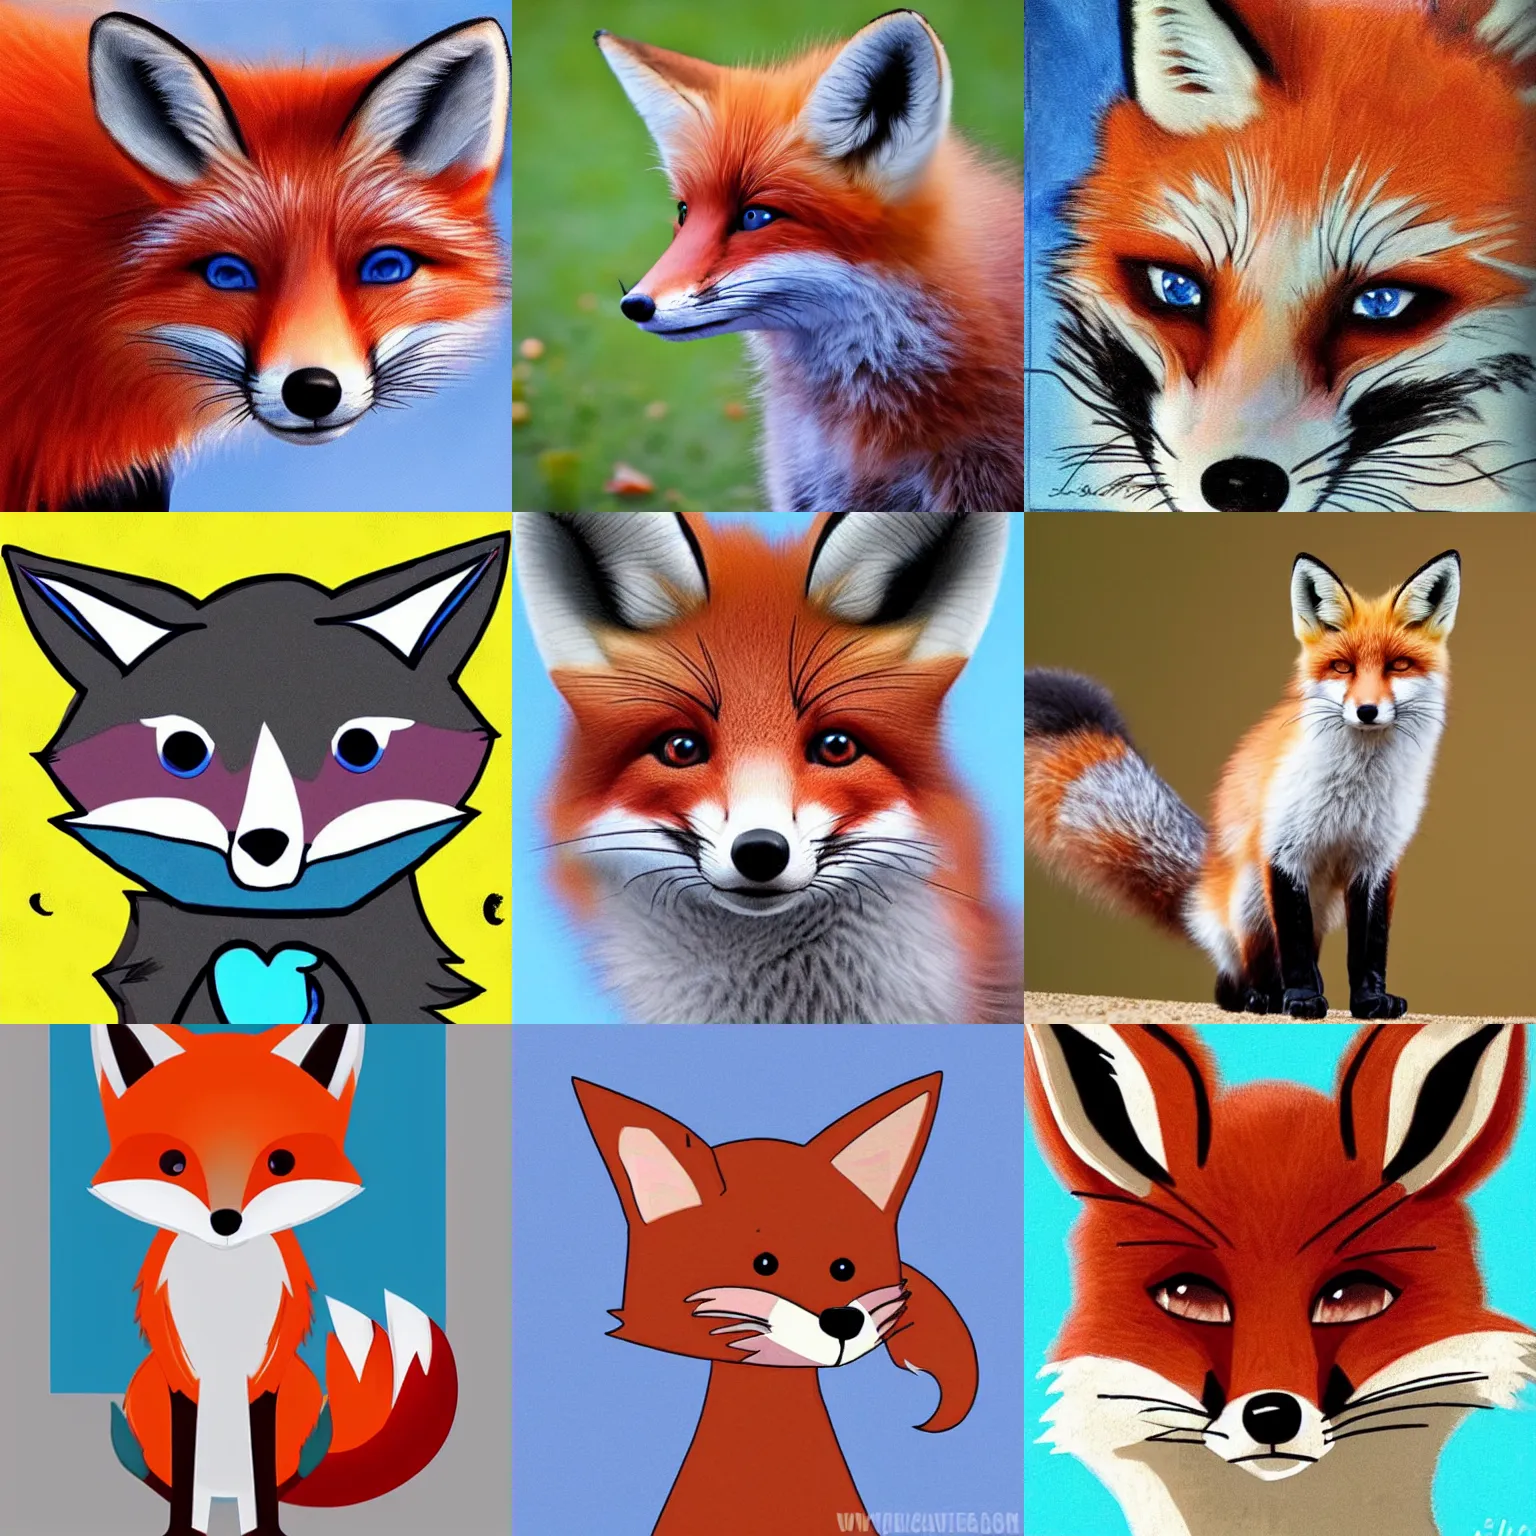 Prompt: a sweet cartoon fox with blue eyes